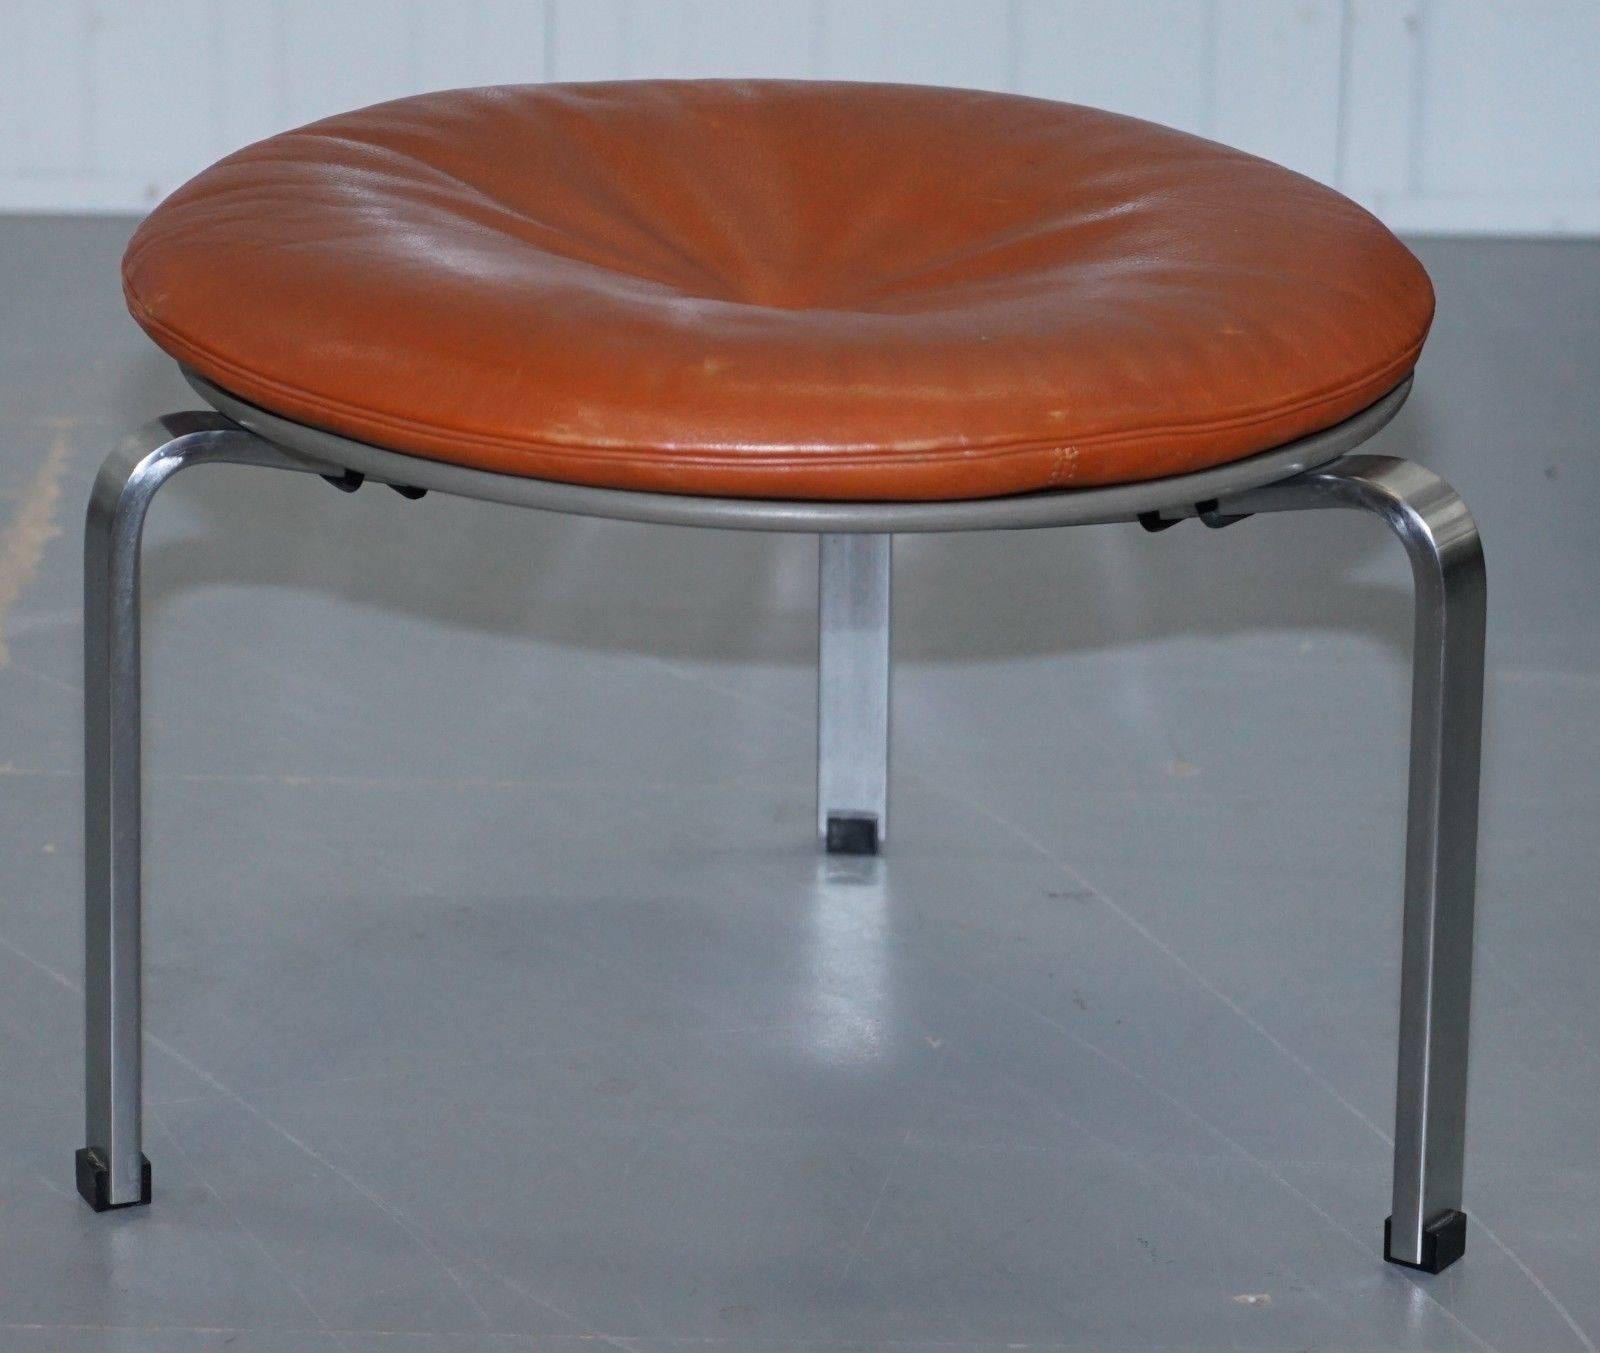 We are delighted to offer for sale this very rare original fully stamped and engraved Poul Kjaerholm PK-33 brown leather stool retailed by Fritz Hansen in 1983

A simply exquisite model, very rare to find with the original factory sticker on as